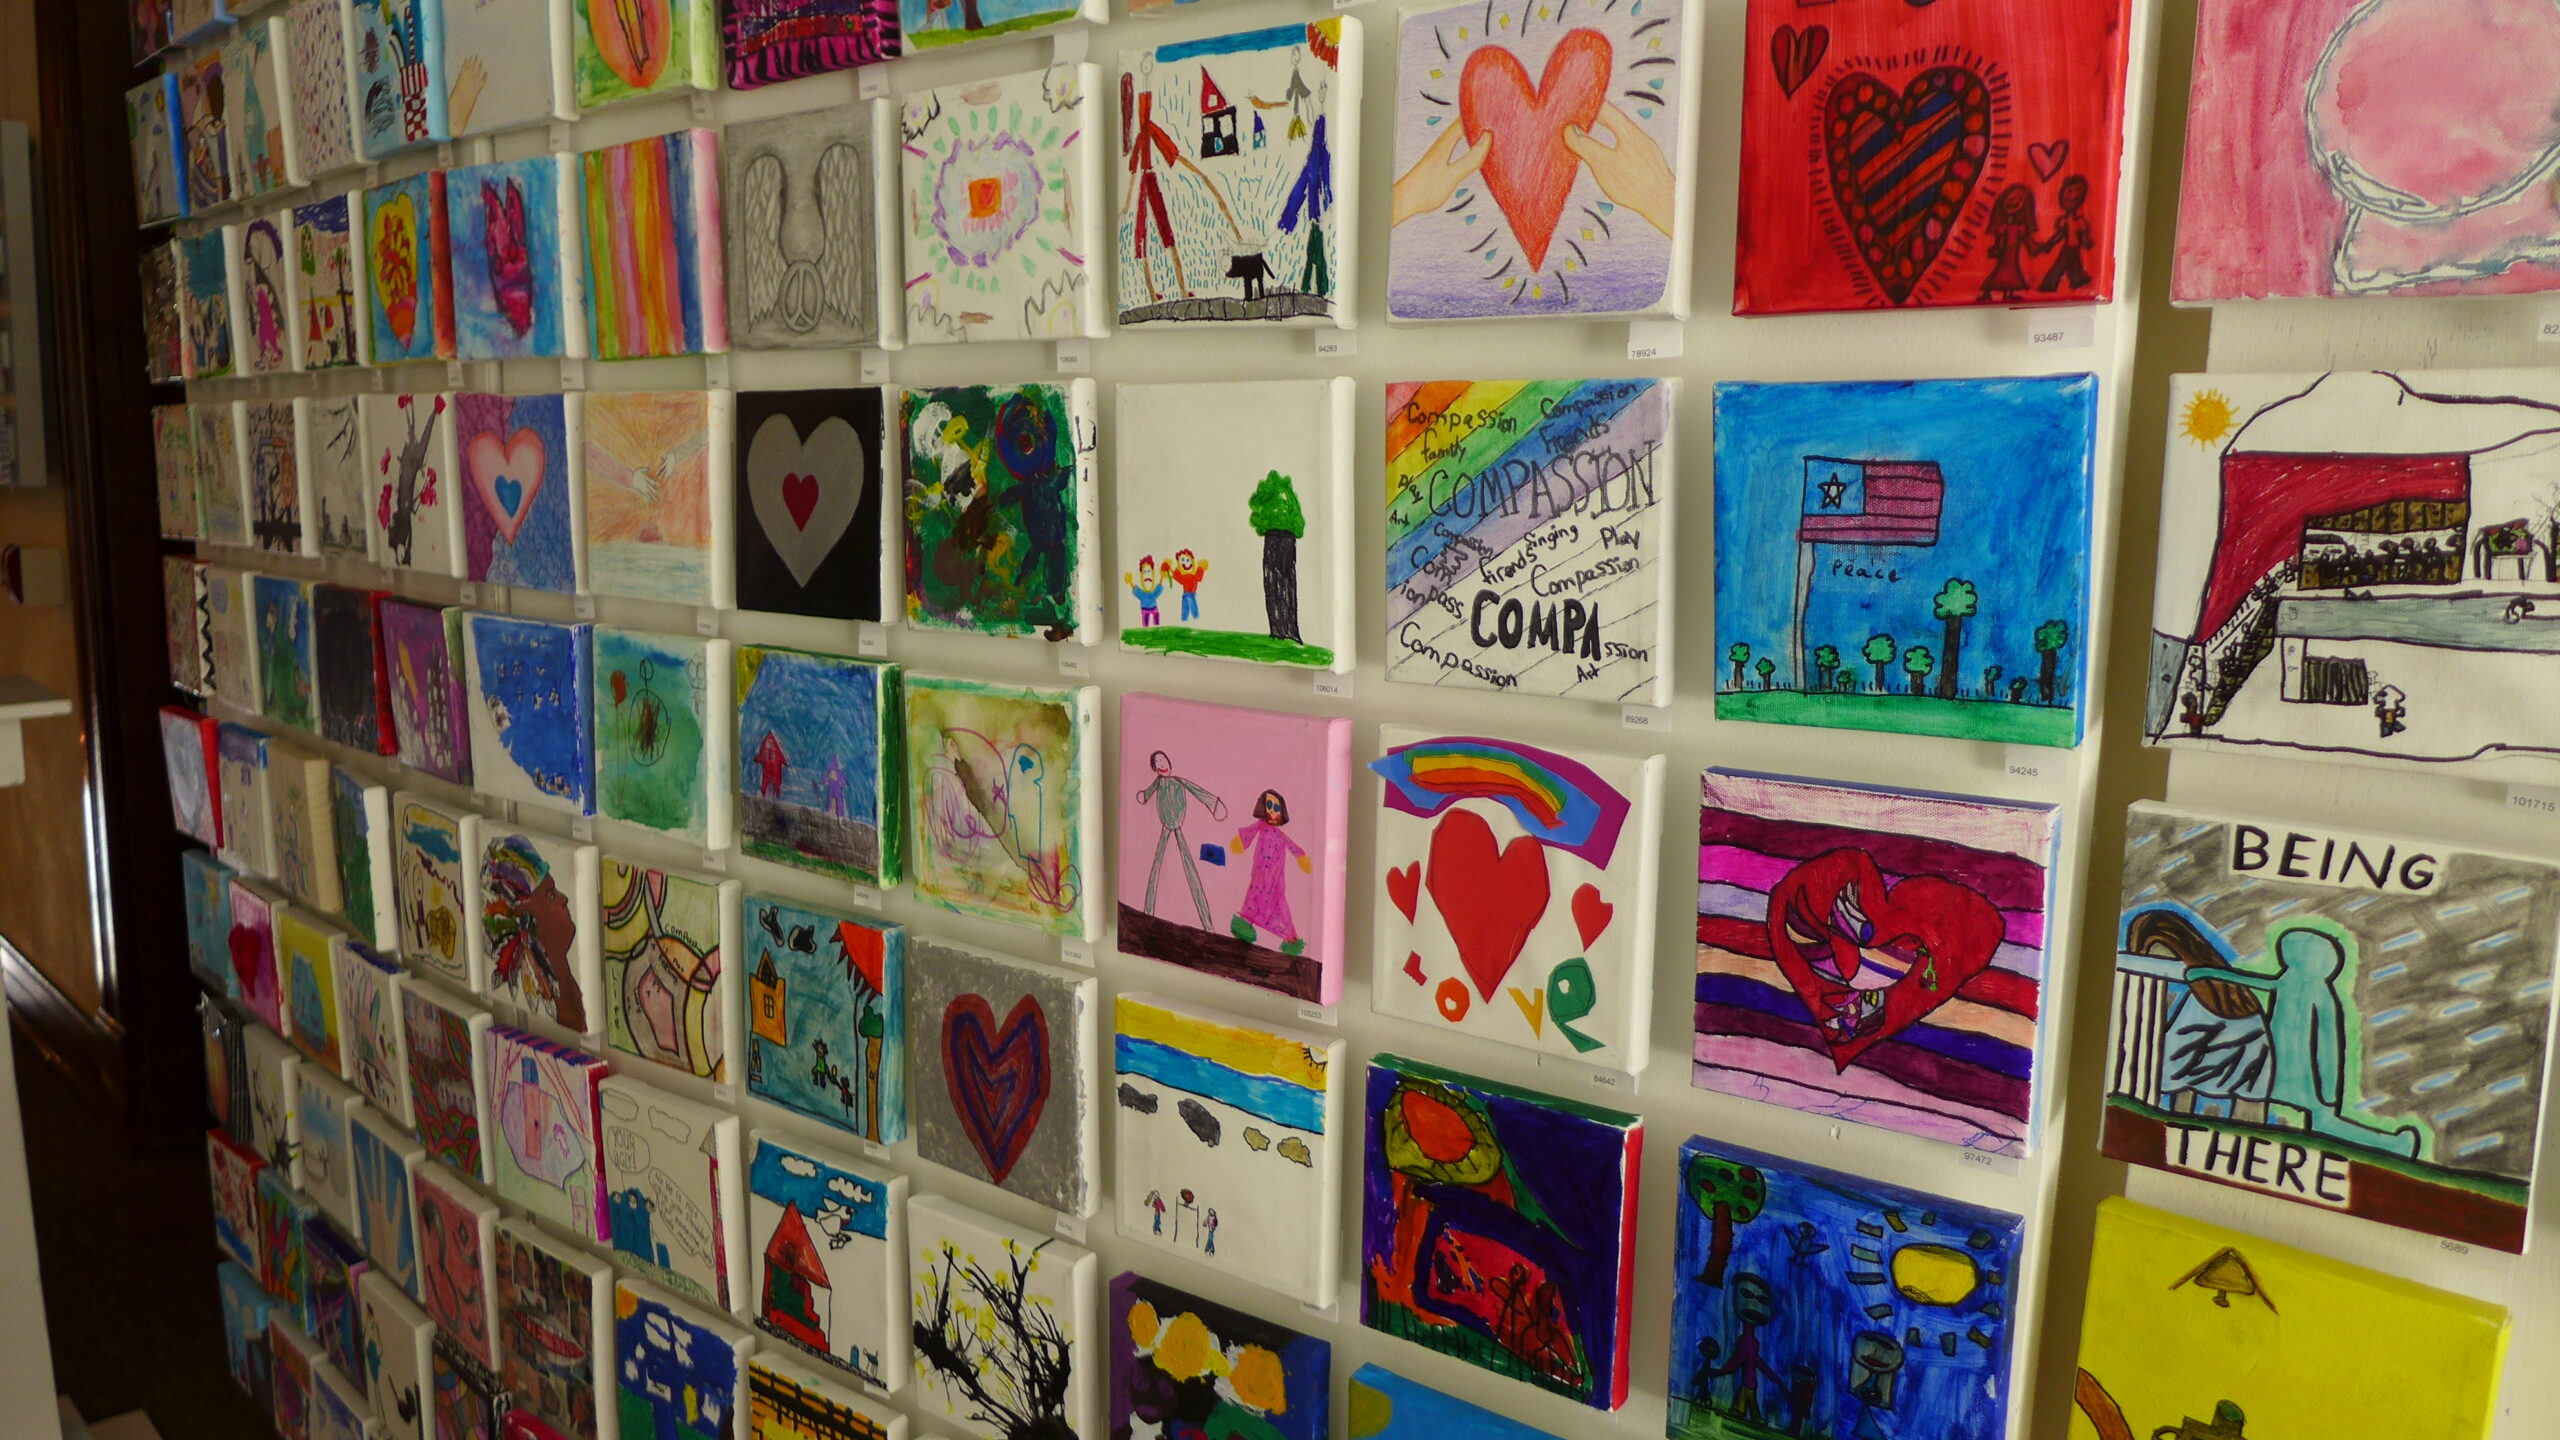 La Crosse Compassion Project artwork is on display at the Pump House until June 28.